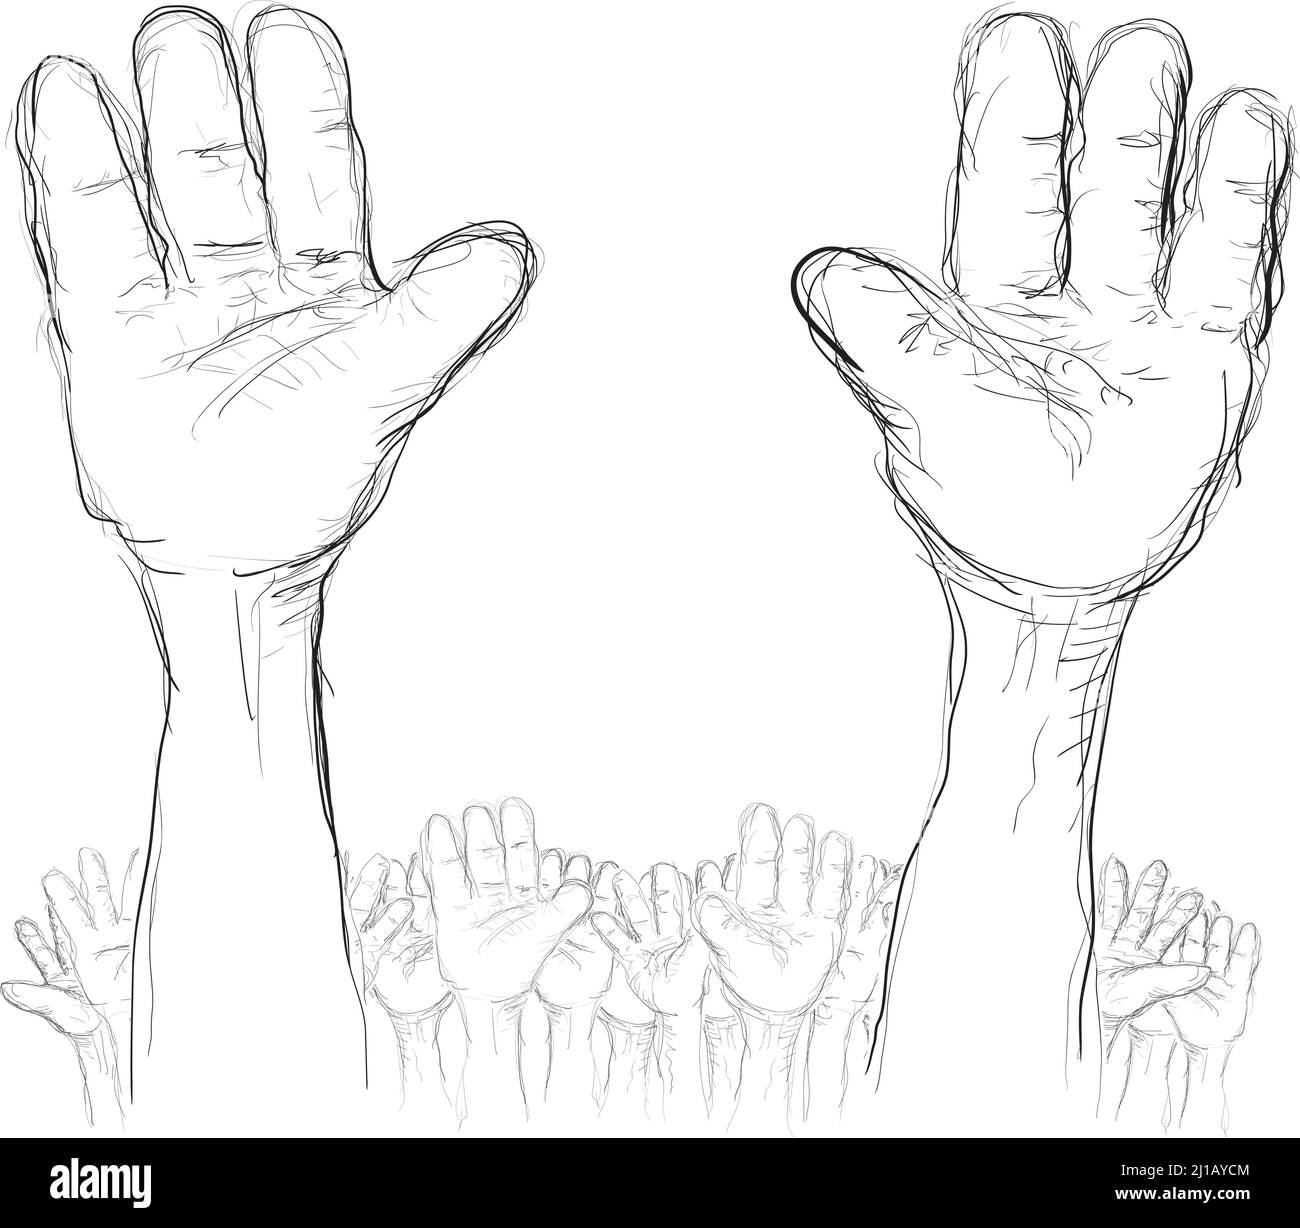 Hands raised up, vector drawing Stock Vector